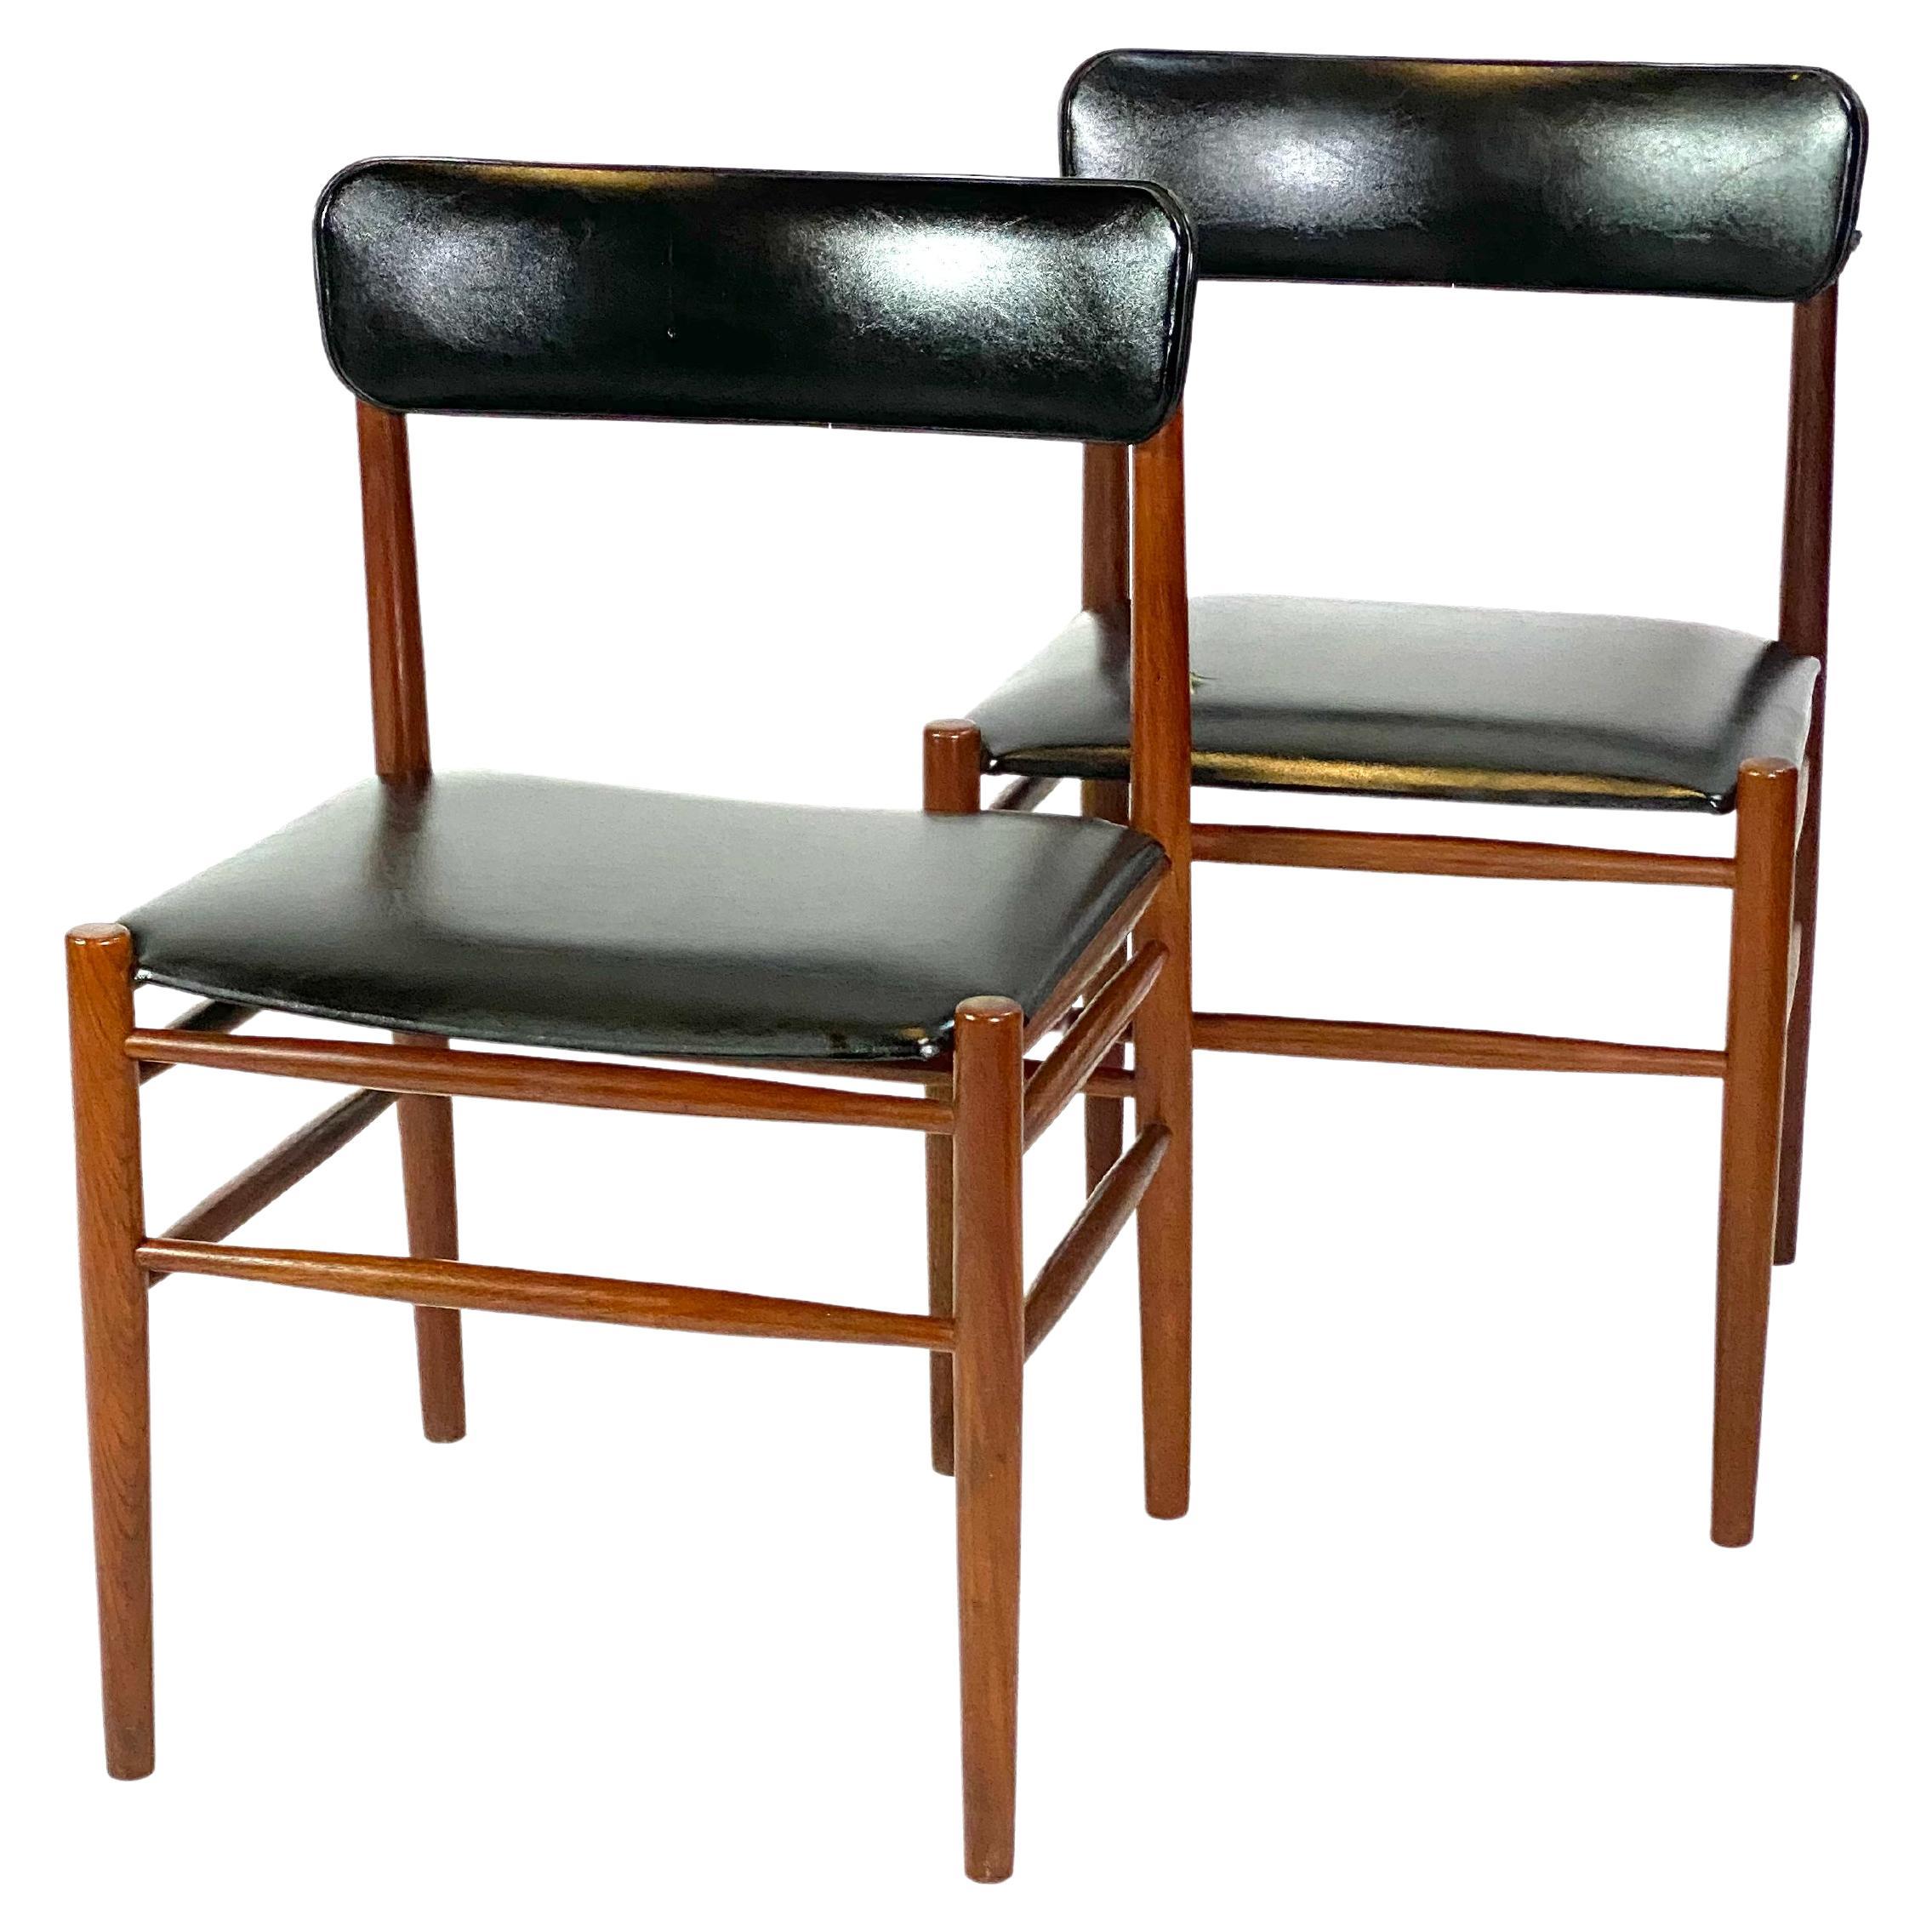 Two Dining Room Chairs in Teak of Danish Design, 1960s